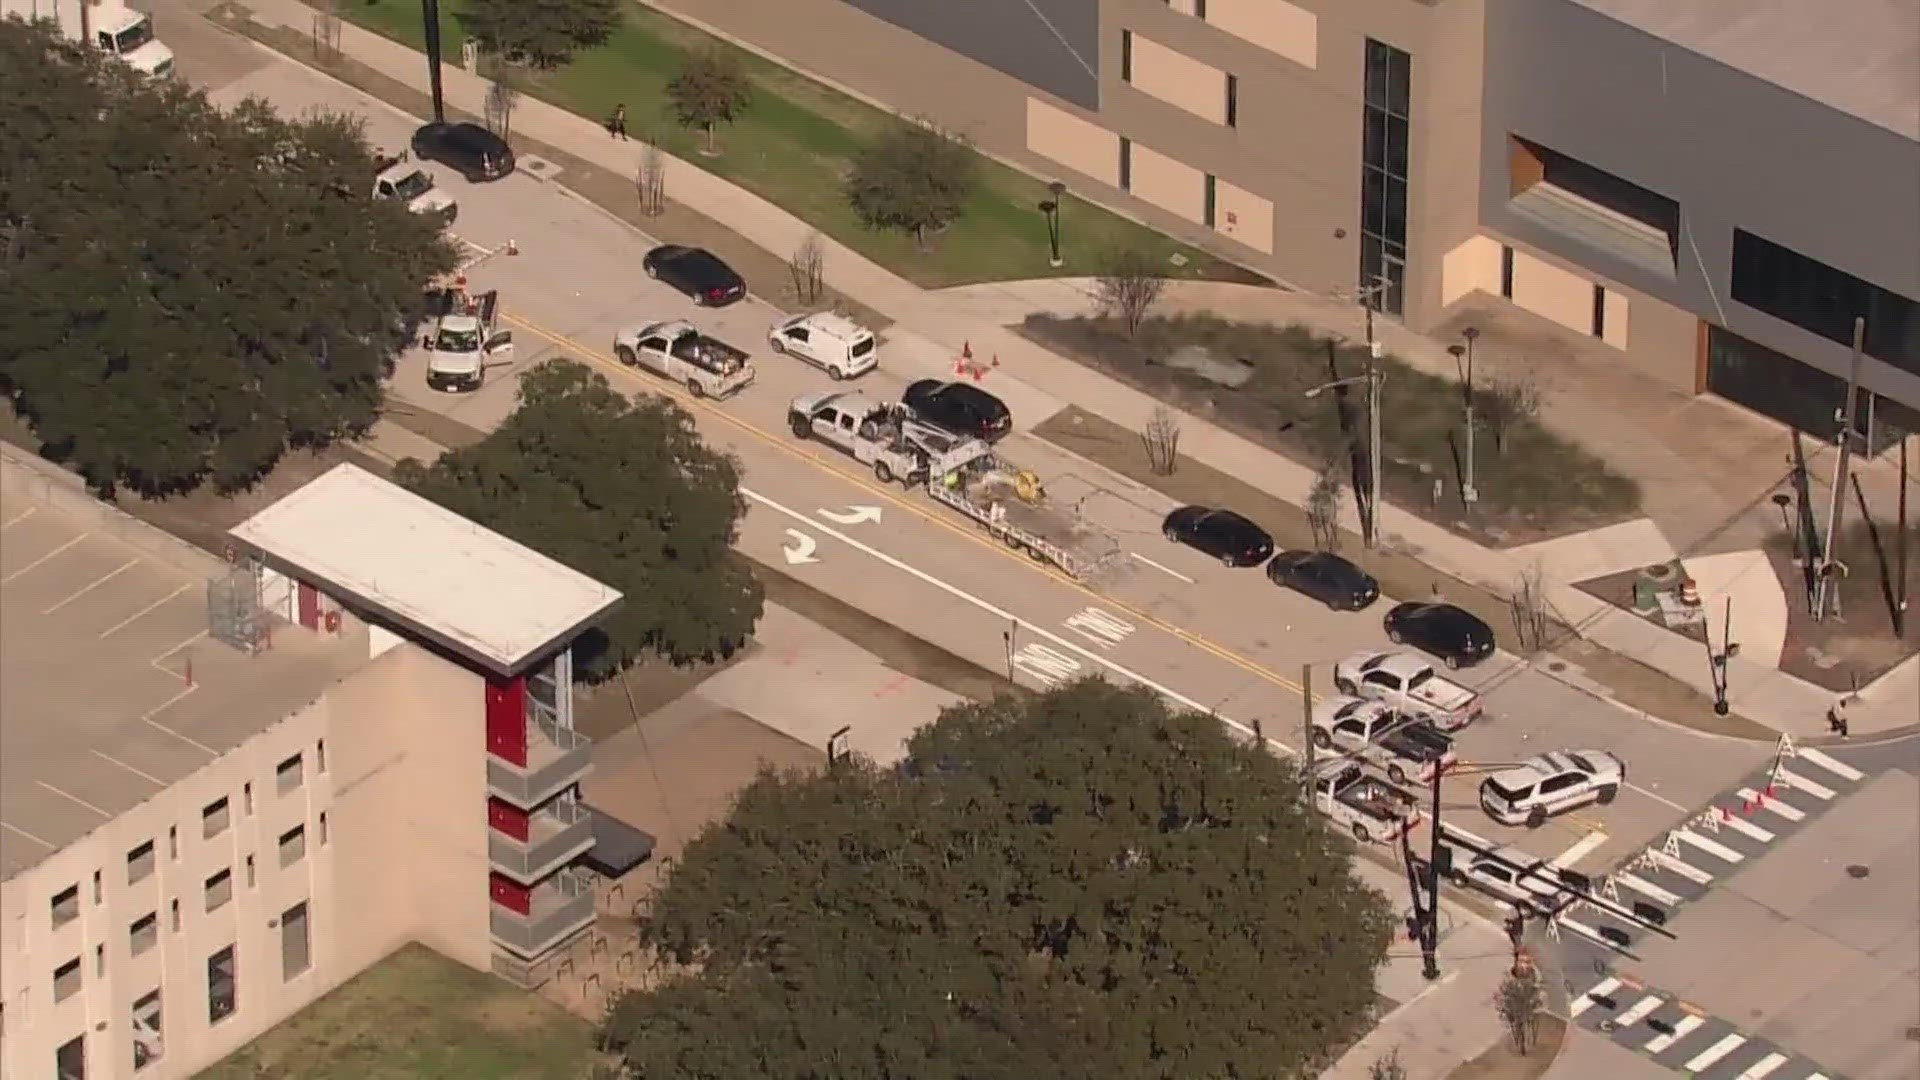 University of Houston officials said there was a gas leak near the football stadium on Monday.